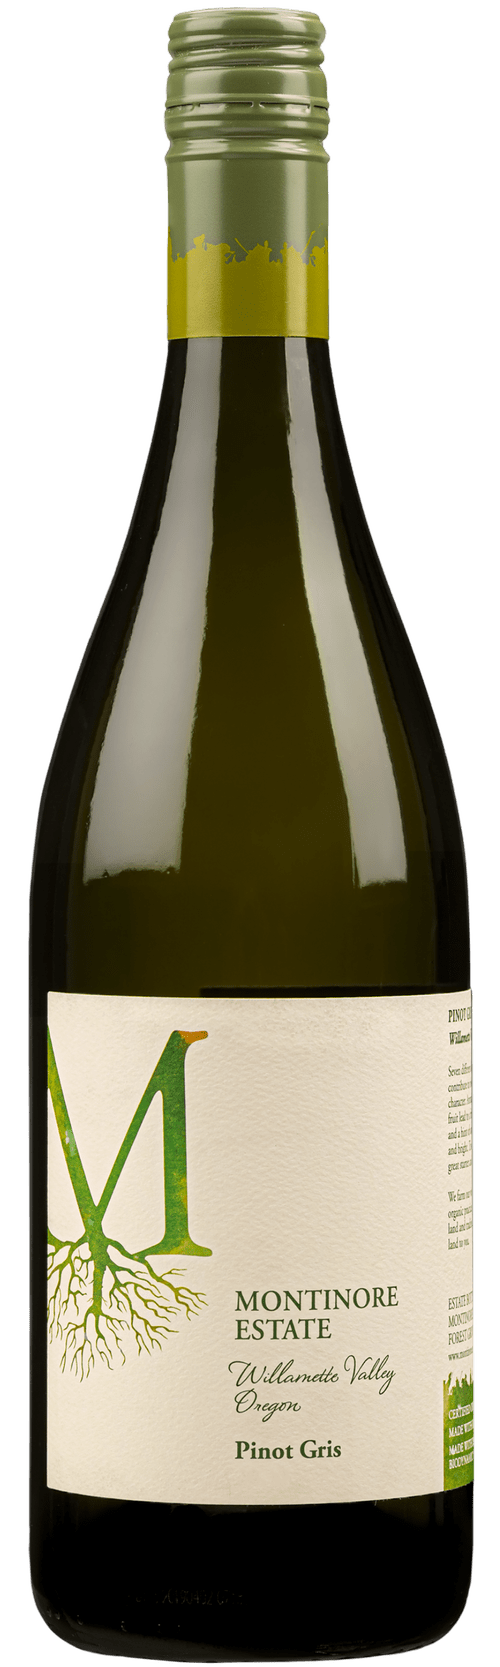 Grassroots Wine Montinore Pinot Gris